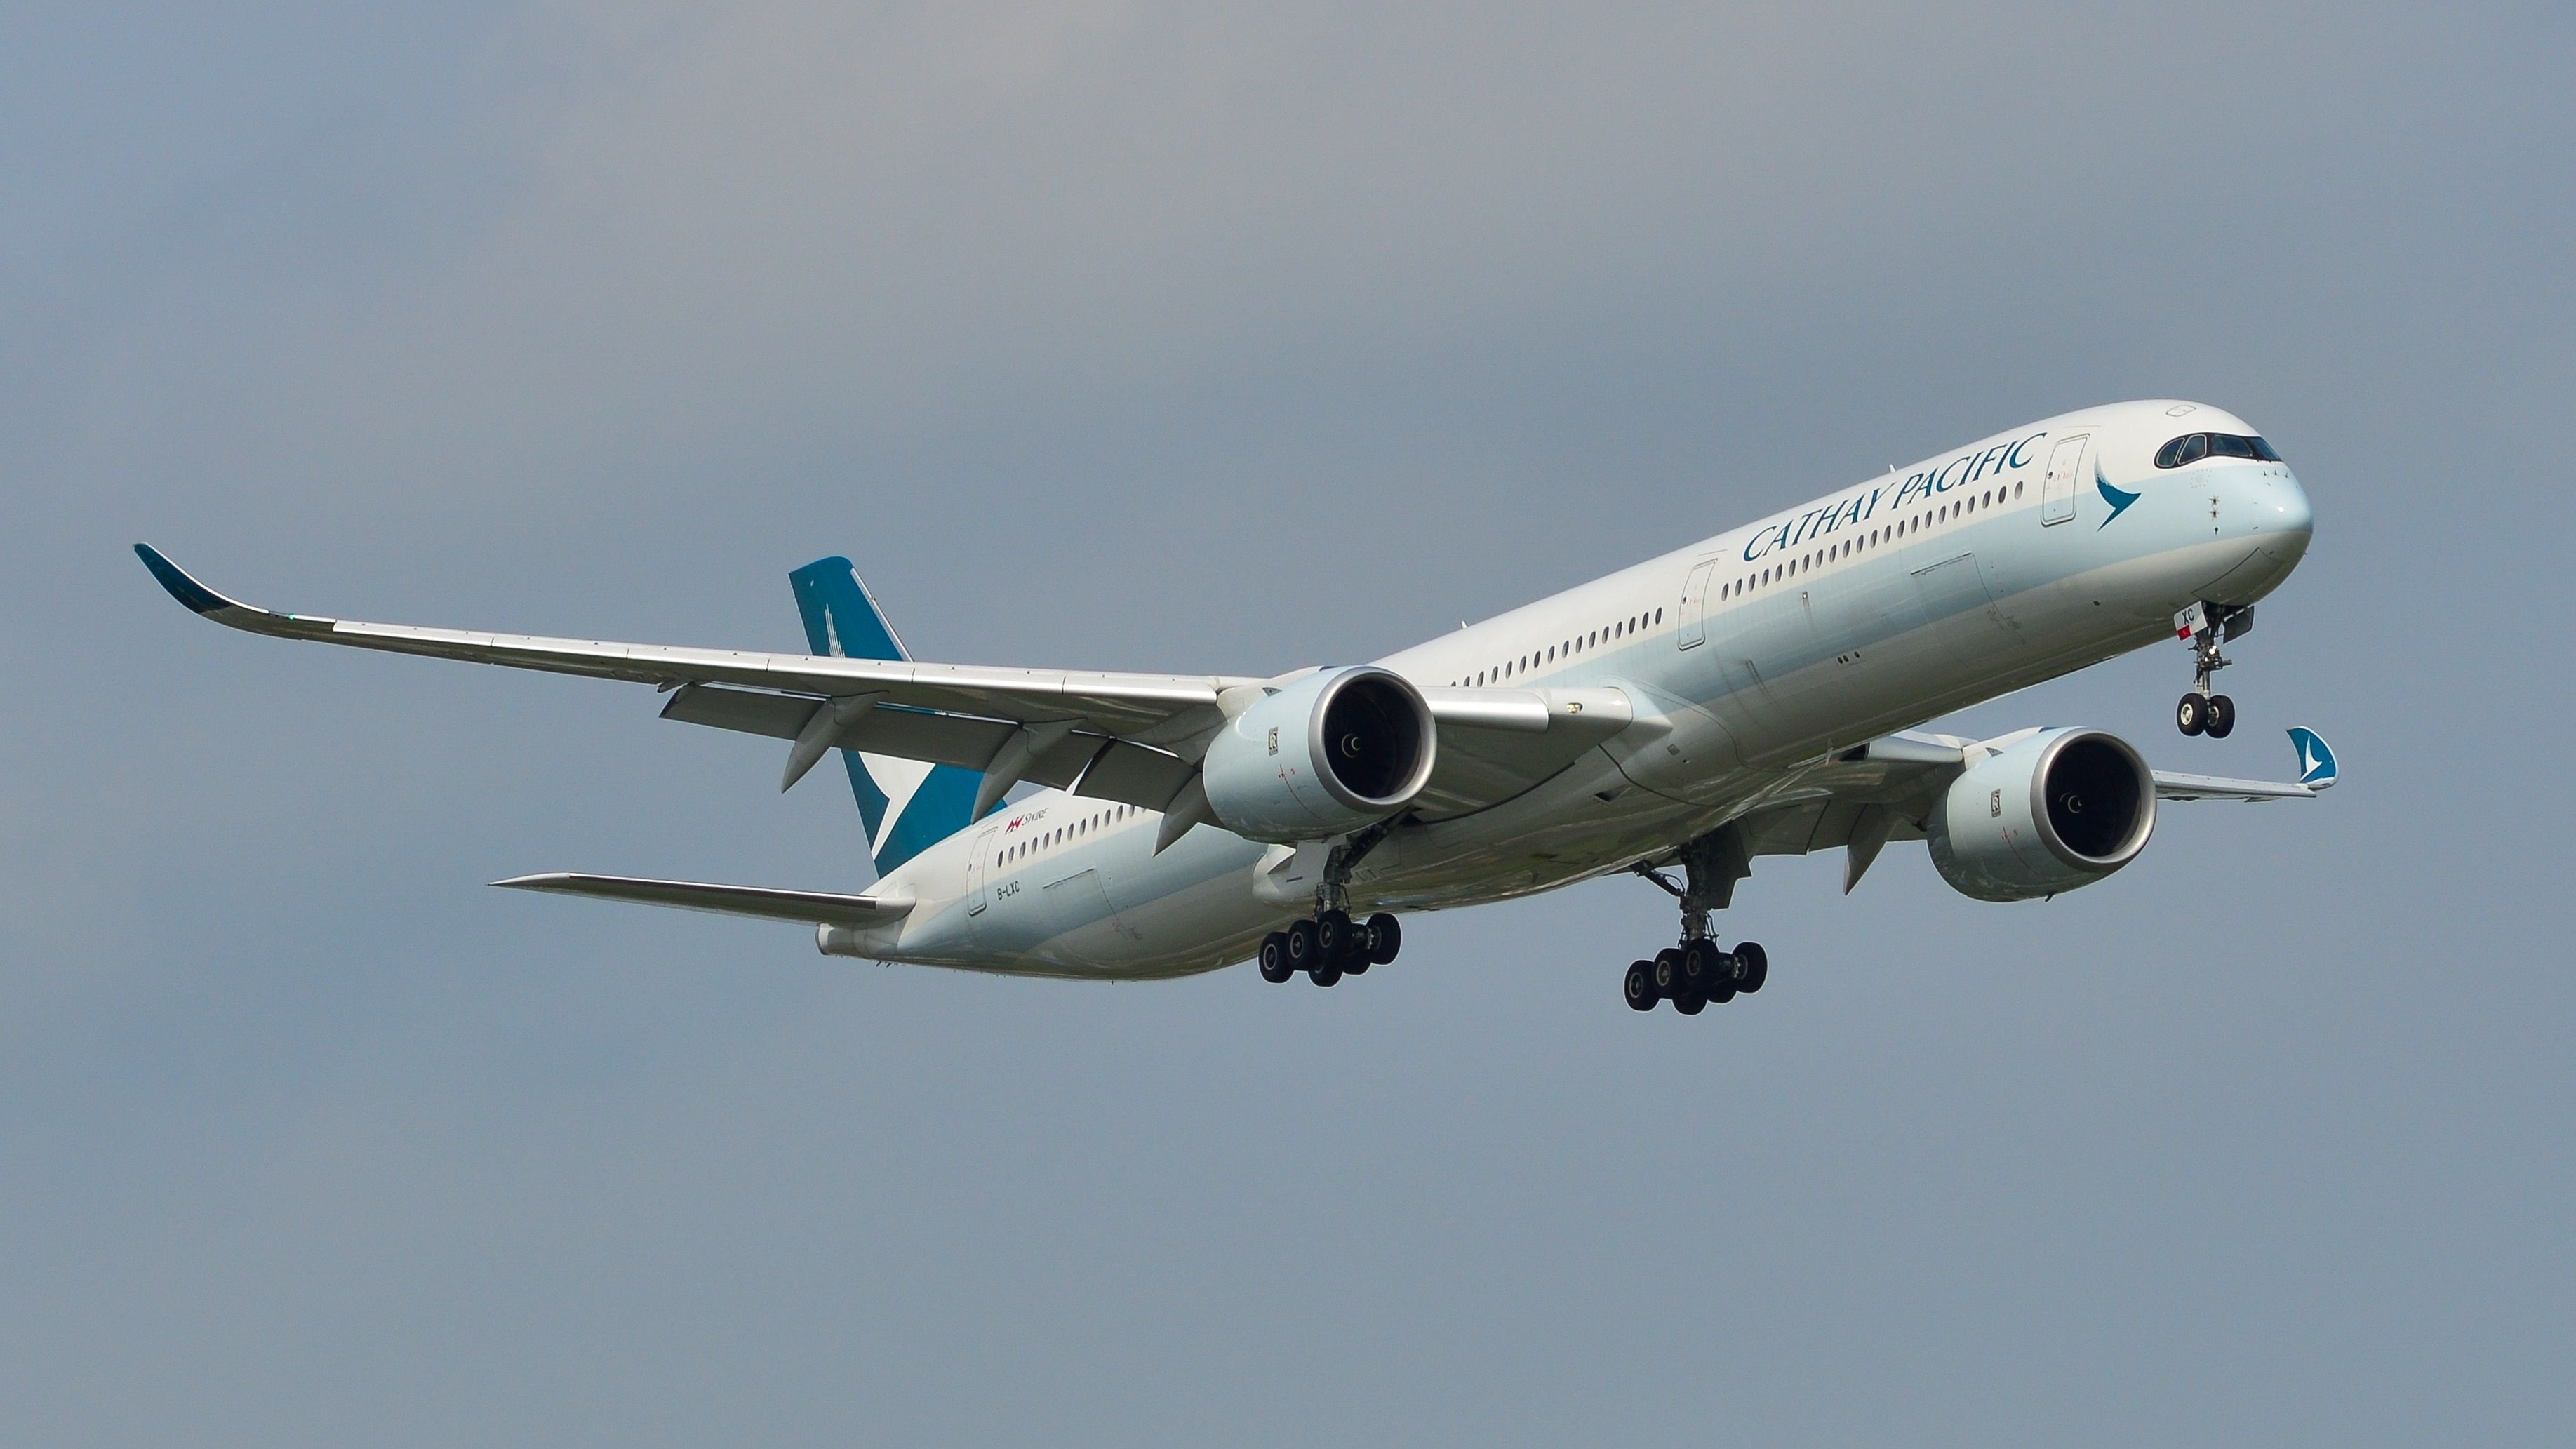 Cathay Pacific A350-1000 landing1 shutterstock_1281227488